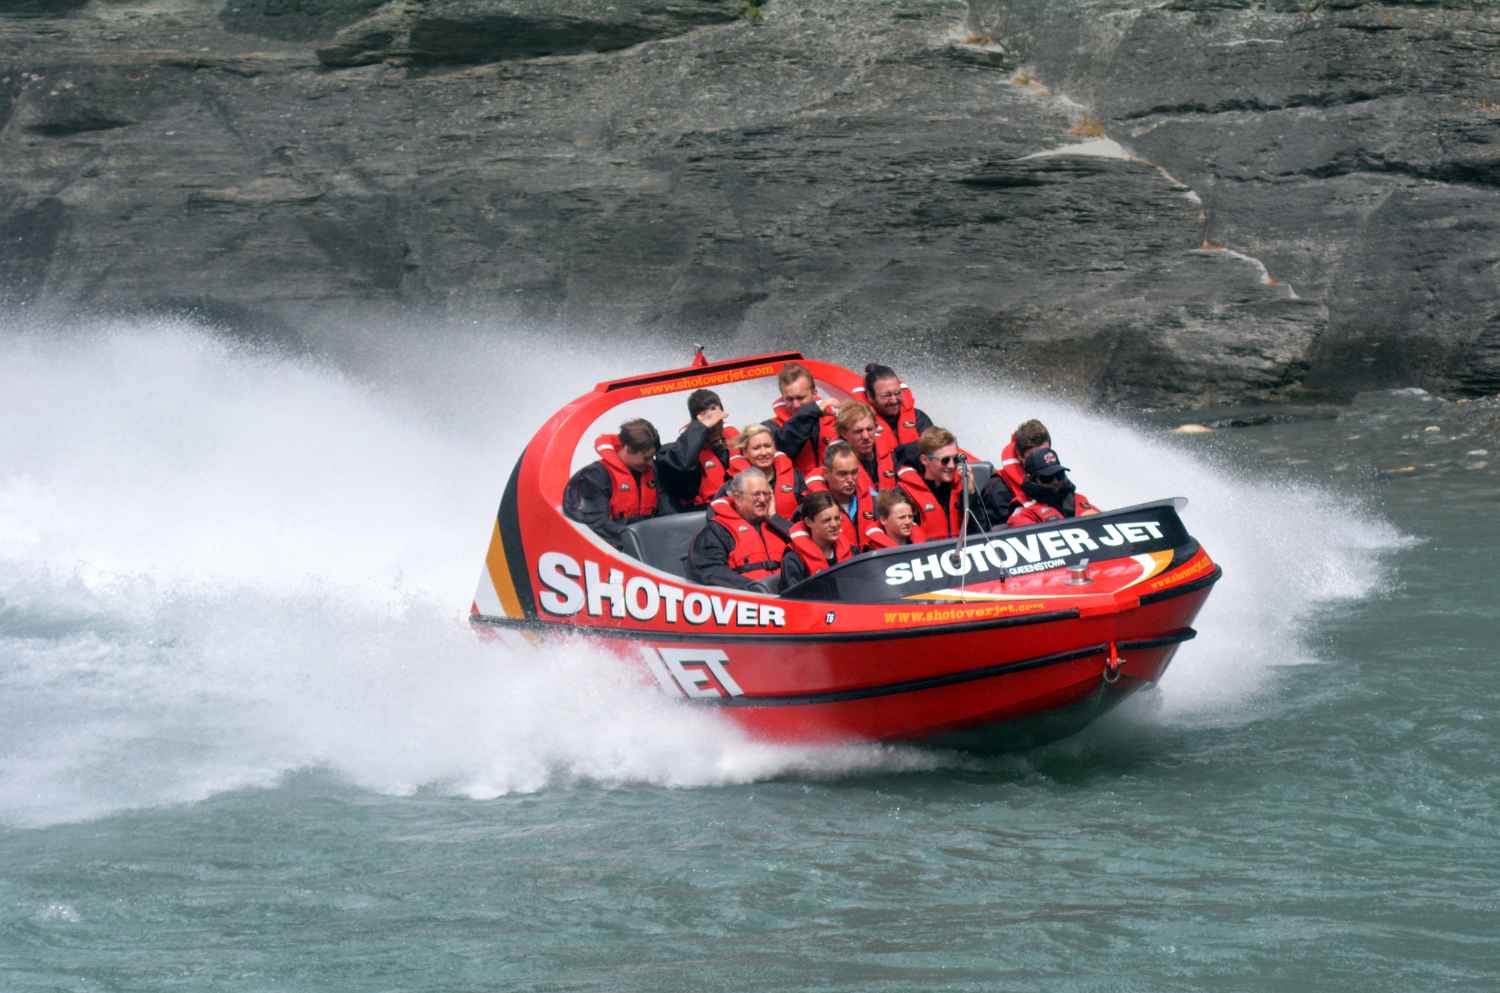 people-on-red-shotover-jet-boat-going-down-river